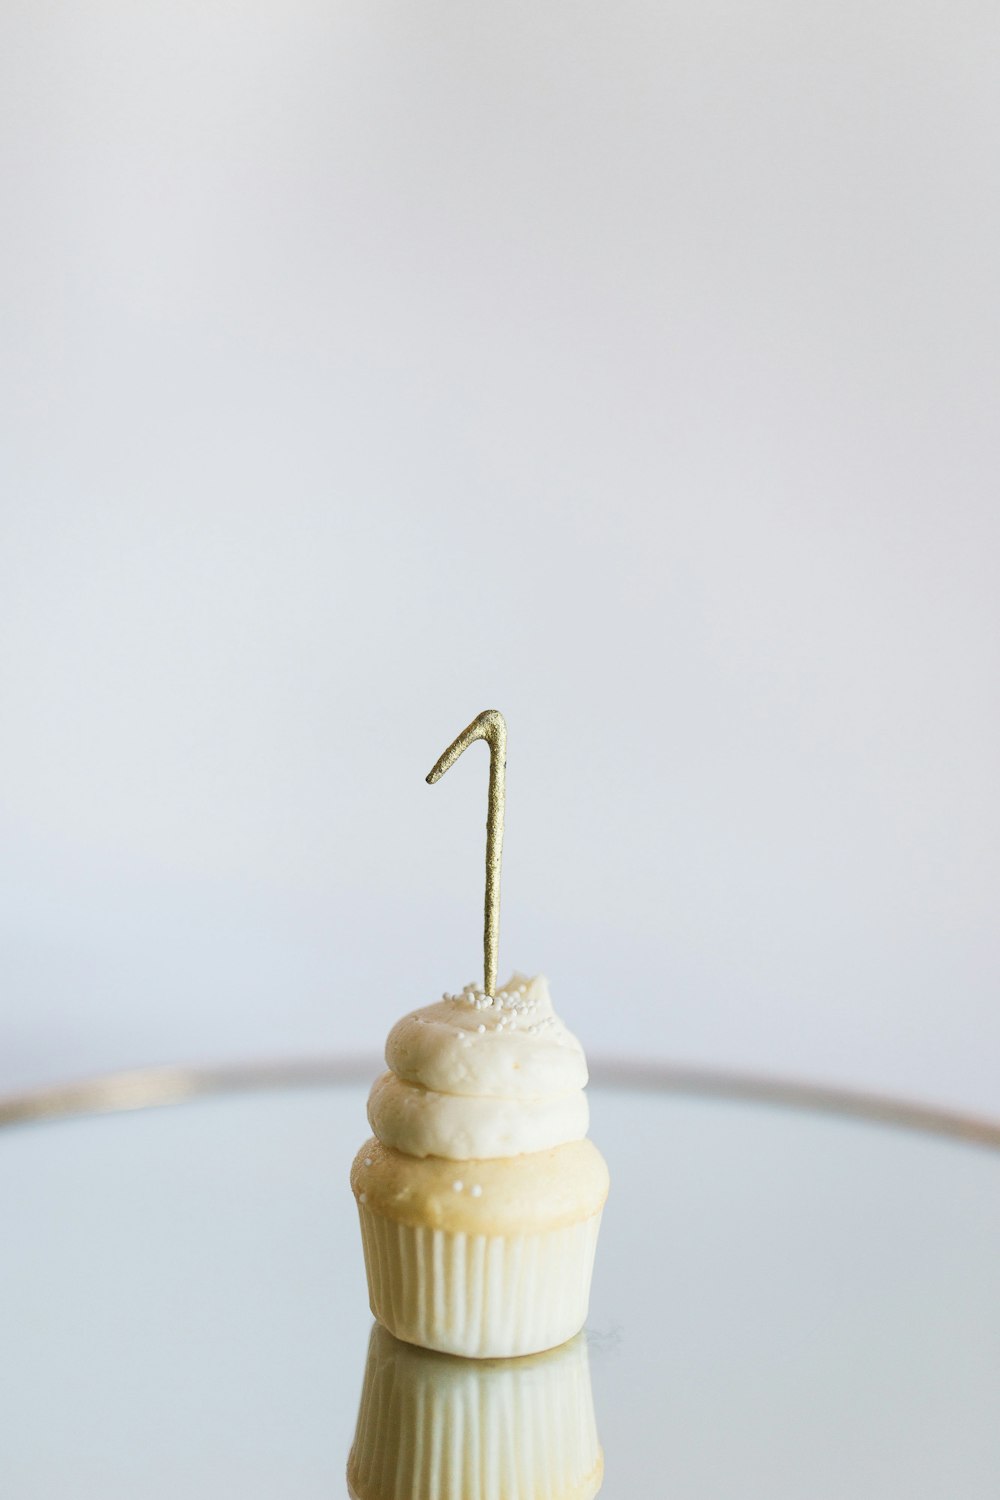 a cupcake with a single candle sticking out of it